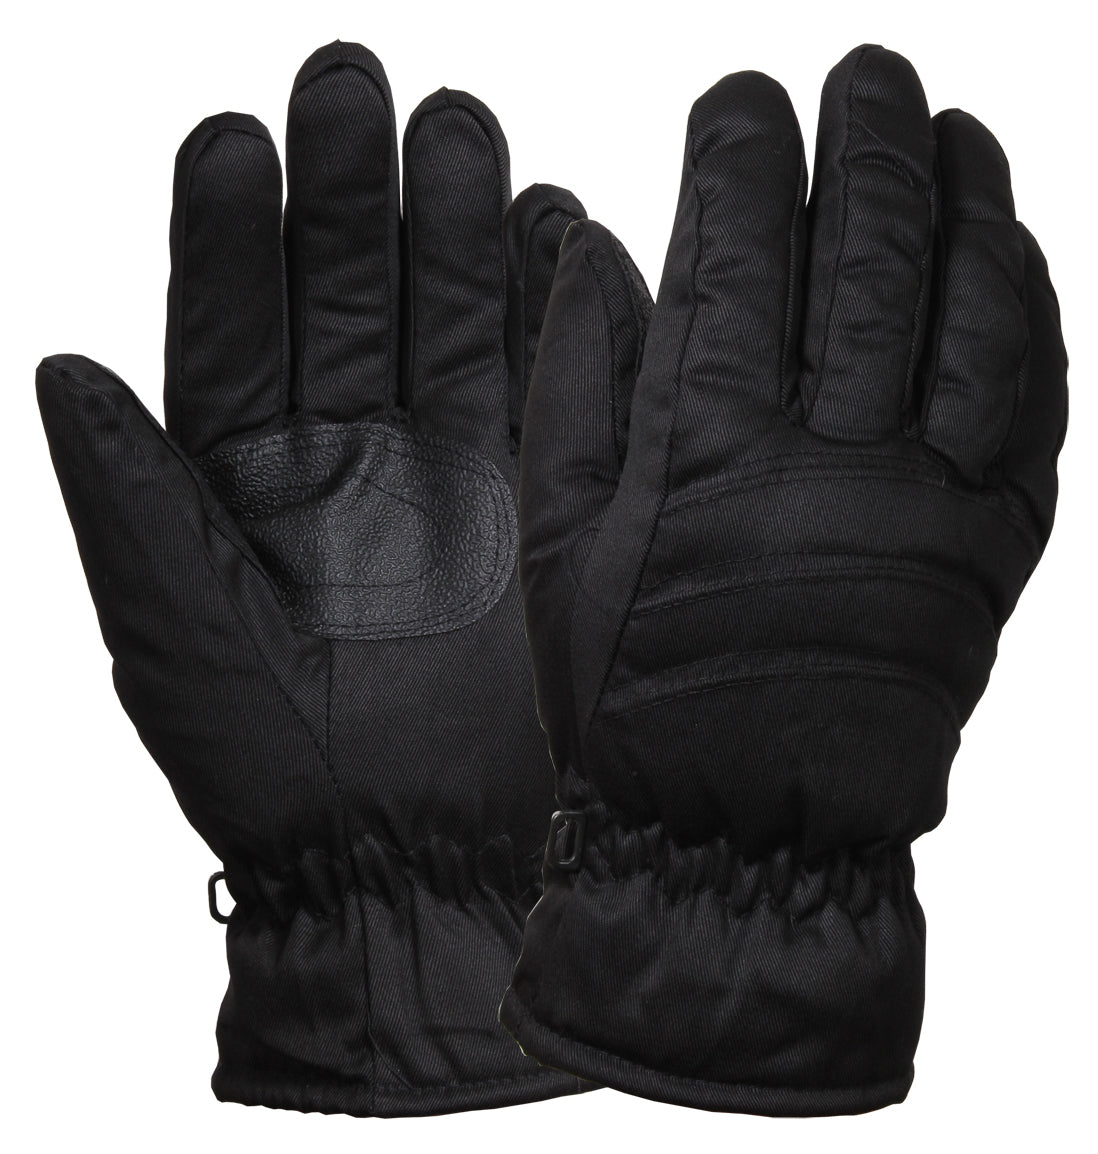 Milspec Insulated Hunting Gloves Cold Weather Gloves MilTac Tactical Military Outdoor Gear Australia